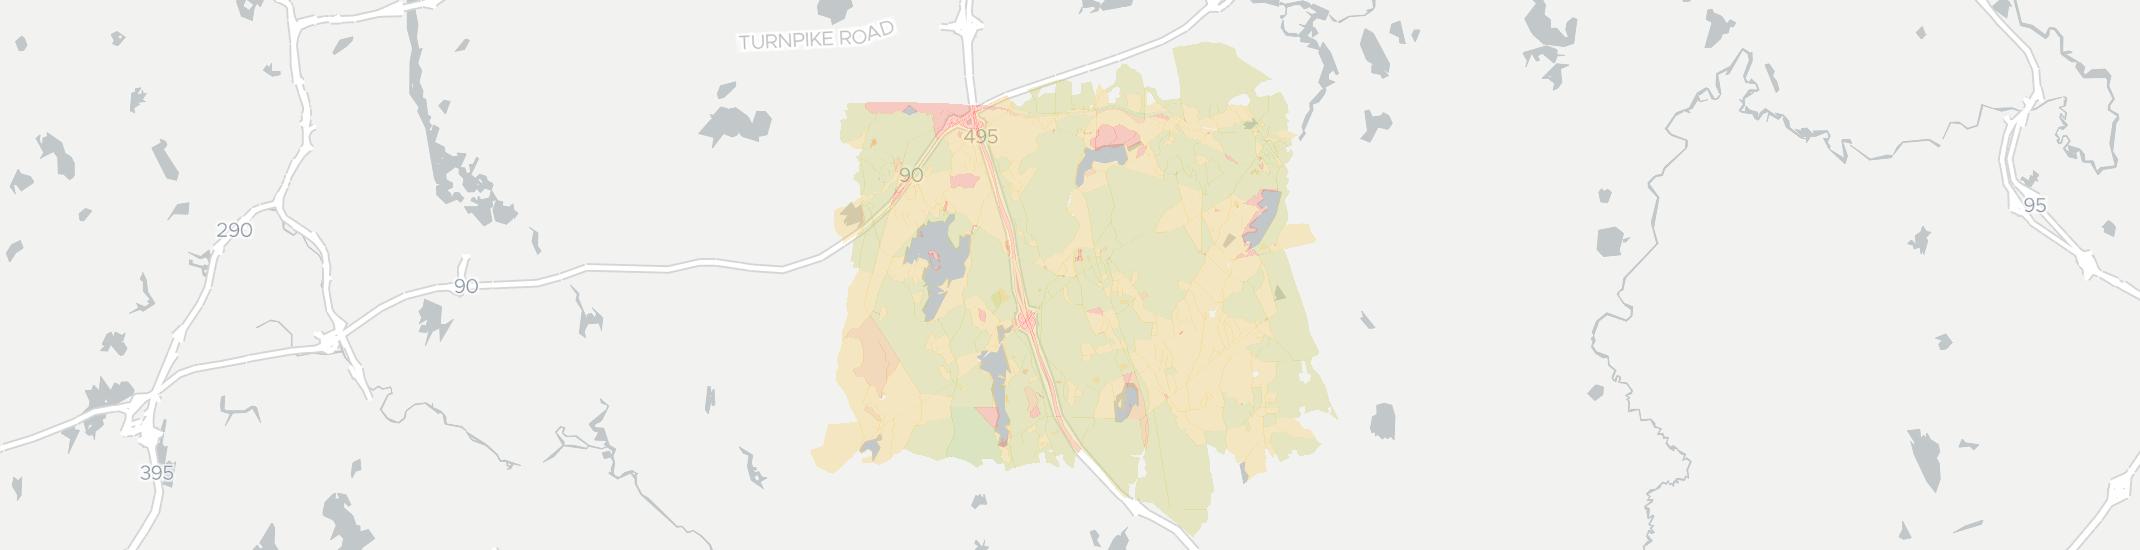 Hopkinton Internet Competition Map. Click for interactive map.